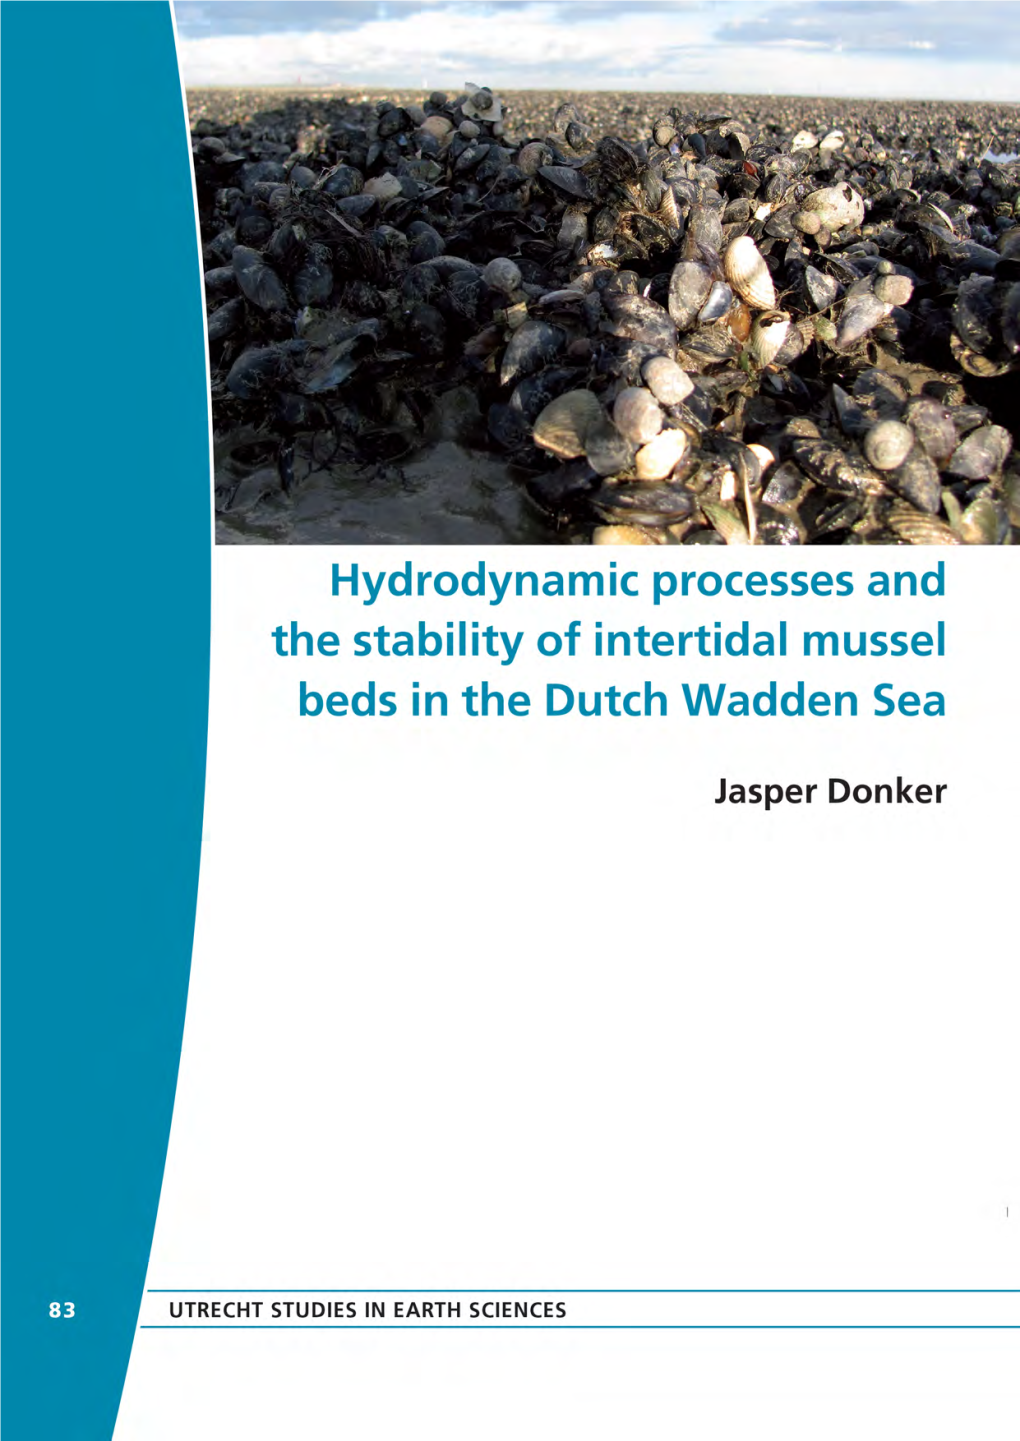 Hydrodynamic Processes and the Stability of Intertidal Mussel Beds in the Dutch Wadden Sea